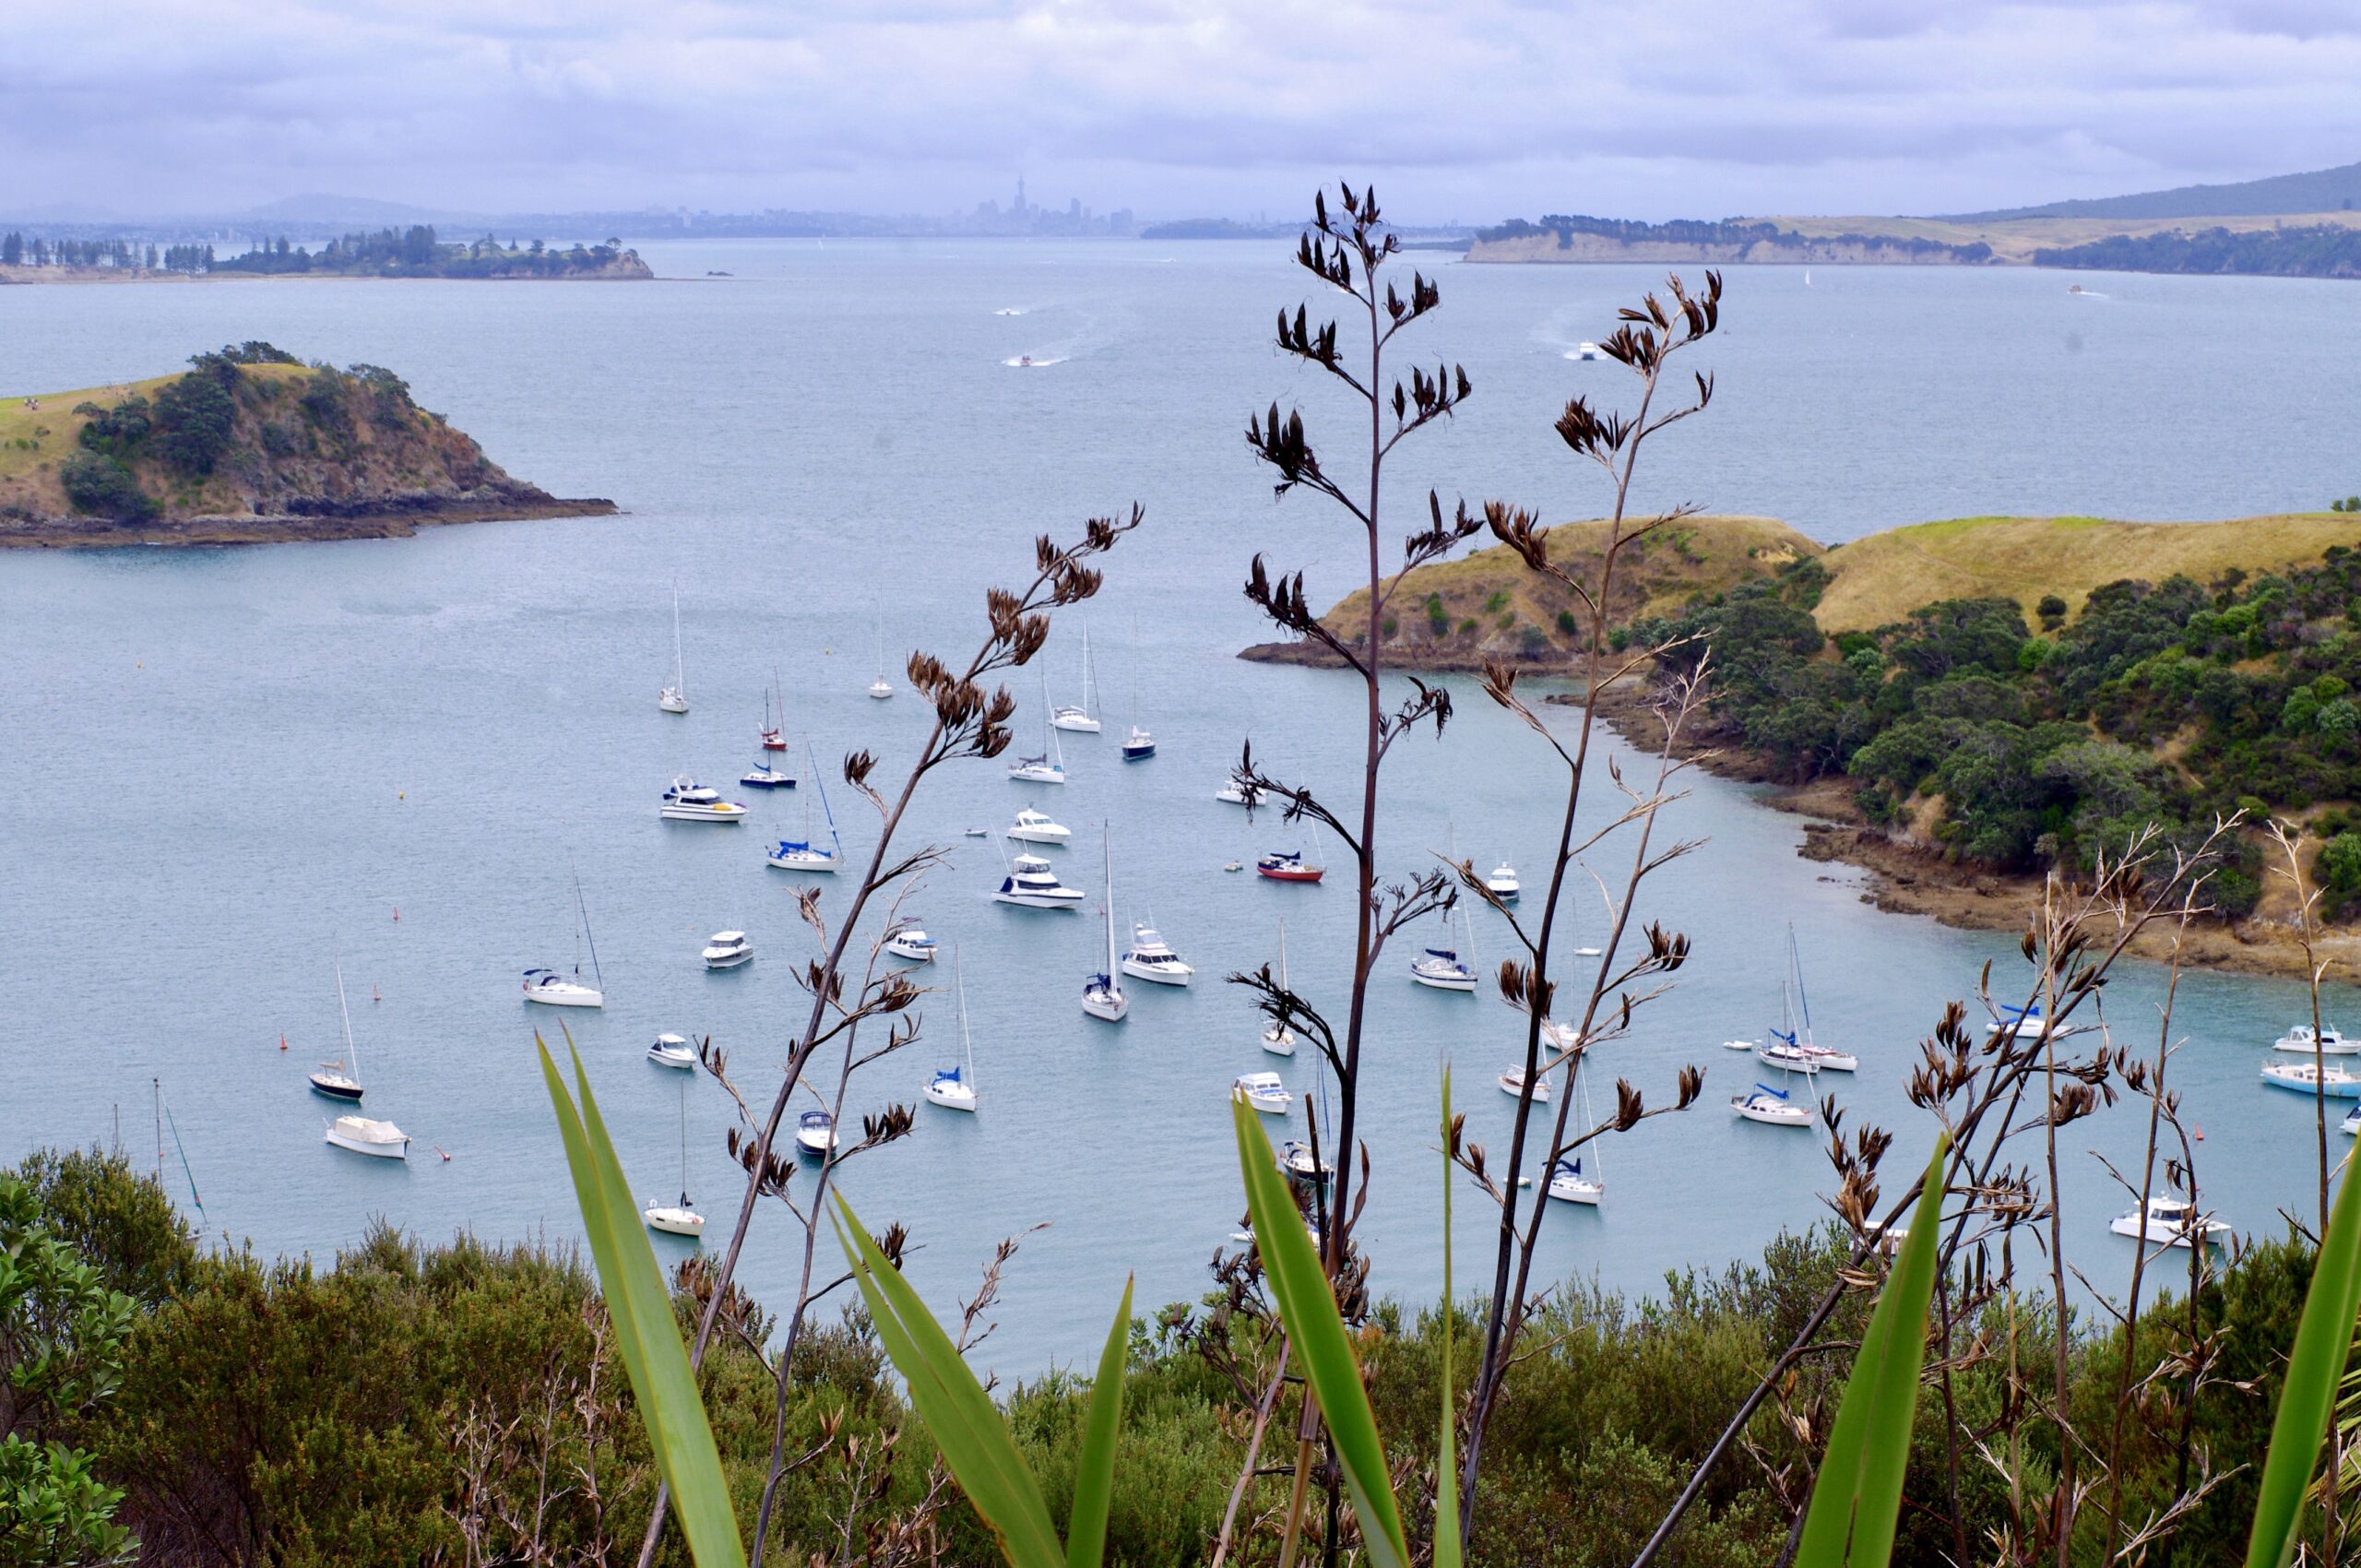 A scenic view of a bay dotted with numerous sailboats, framed by tall, slender plant stalks and leaves in the foreground. Rolling hills covered in greenery and small, tree-lined islands are visible, with a hazy city skyline in the distance under a cloudy sky.